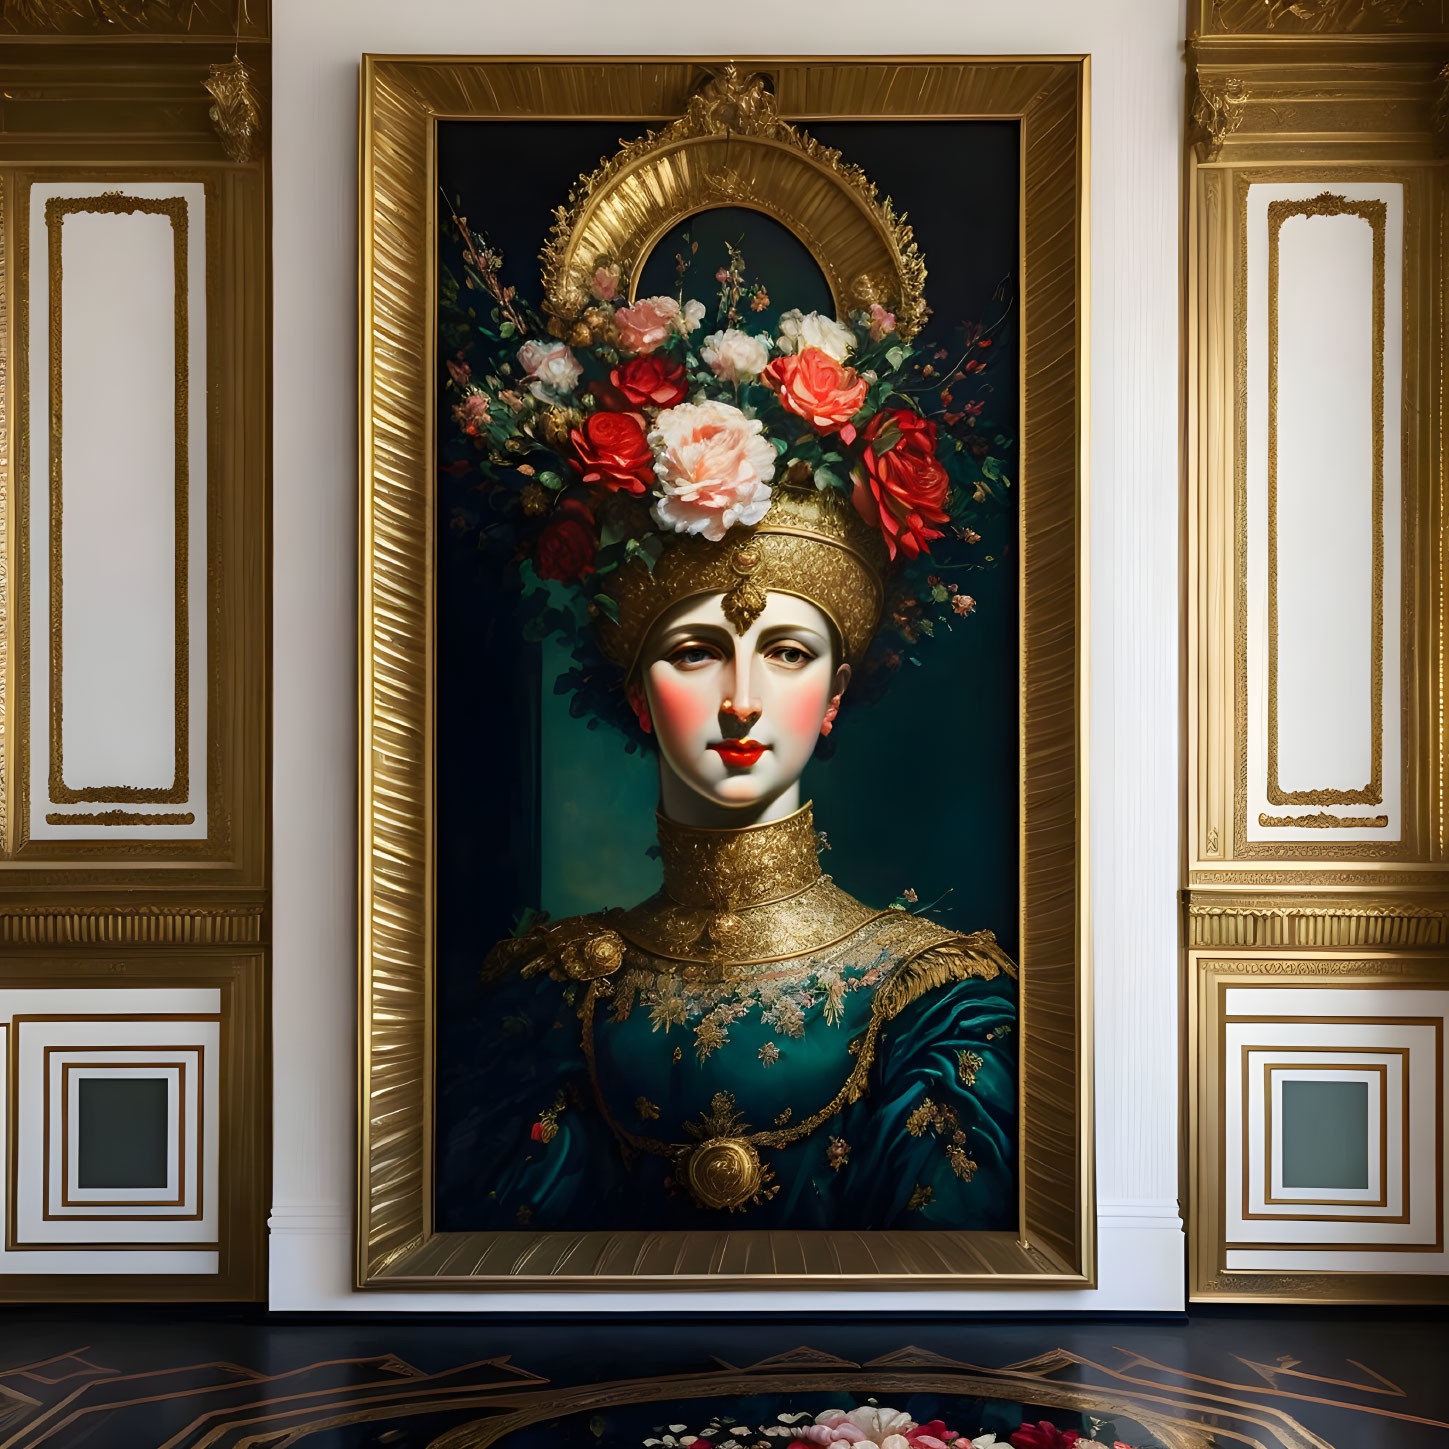 Surreal portrait of woman with floral headpiece in ornate gold frame in elegant room